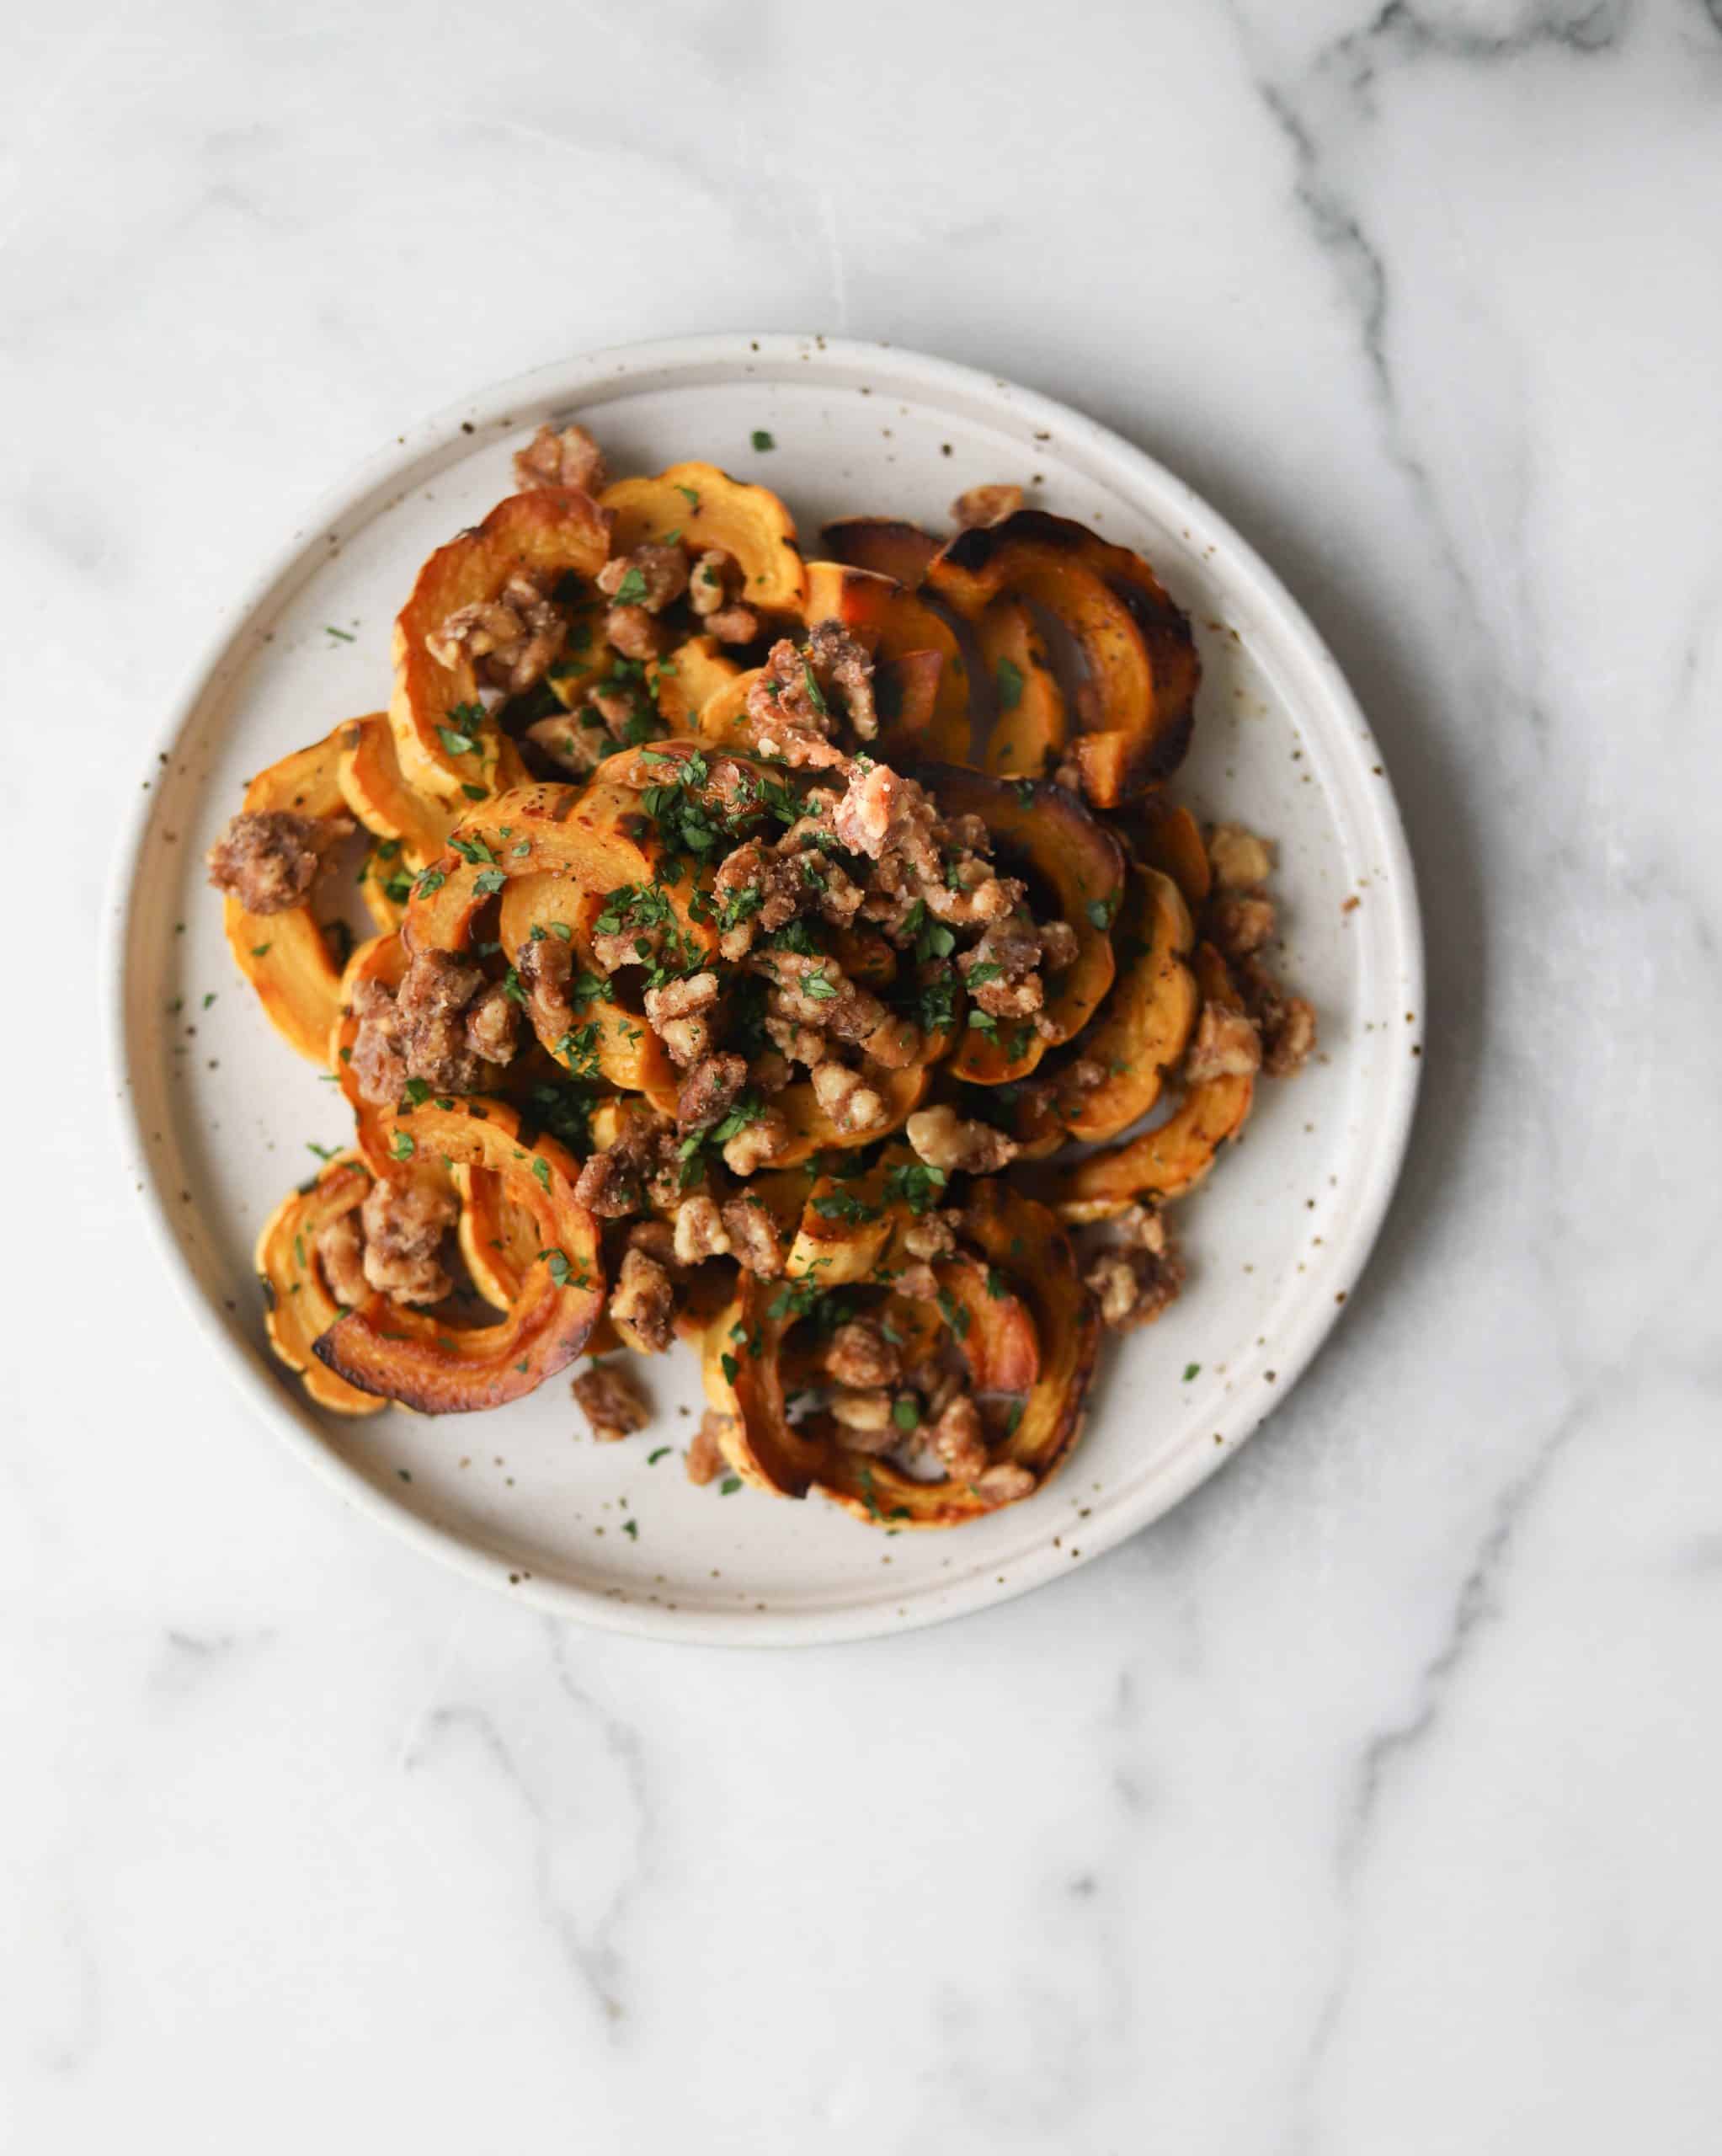 Delicata squash with walnut crumble on a white speckled plate